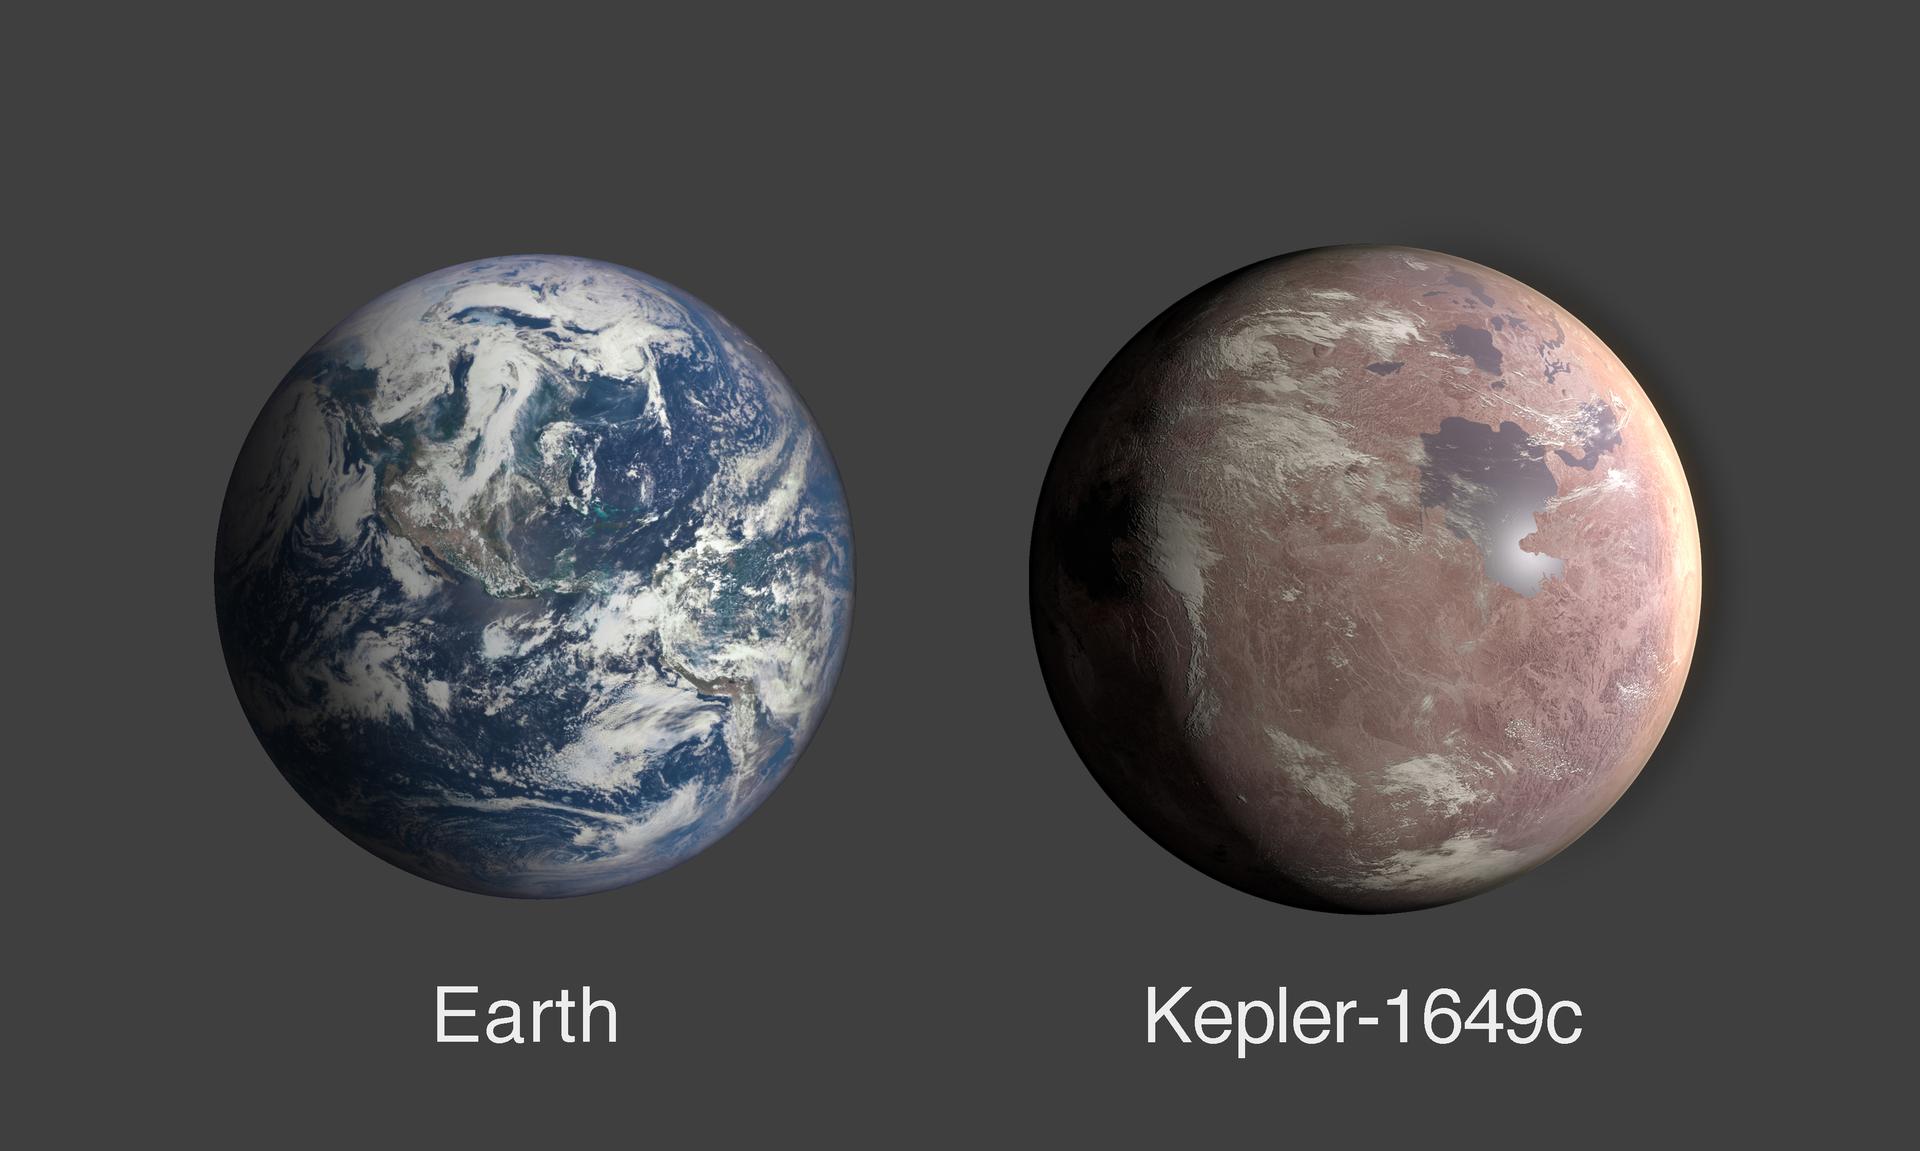 Kepler-1649c and Earth comparison